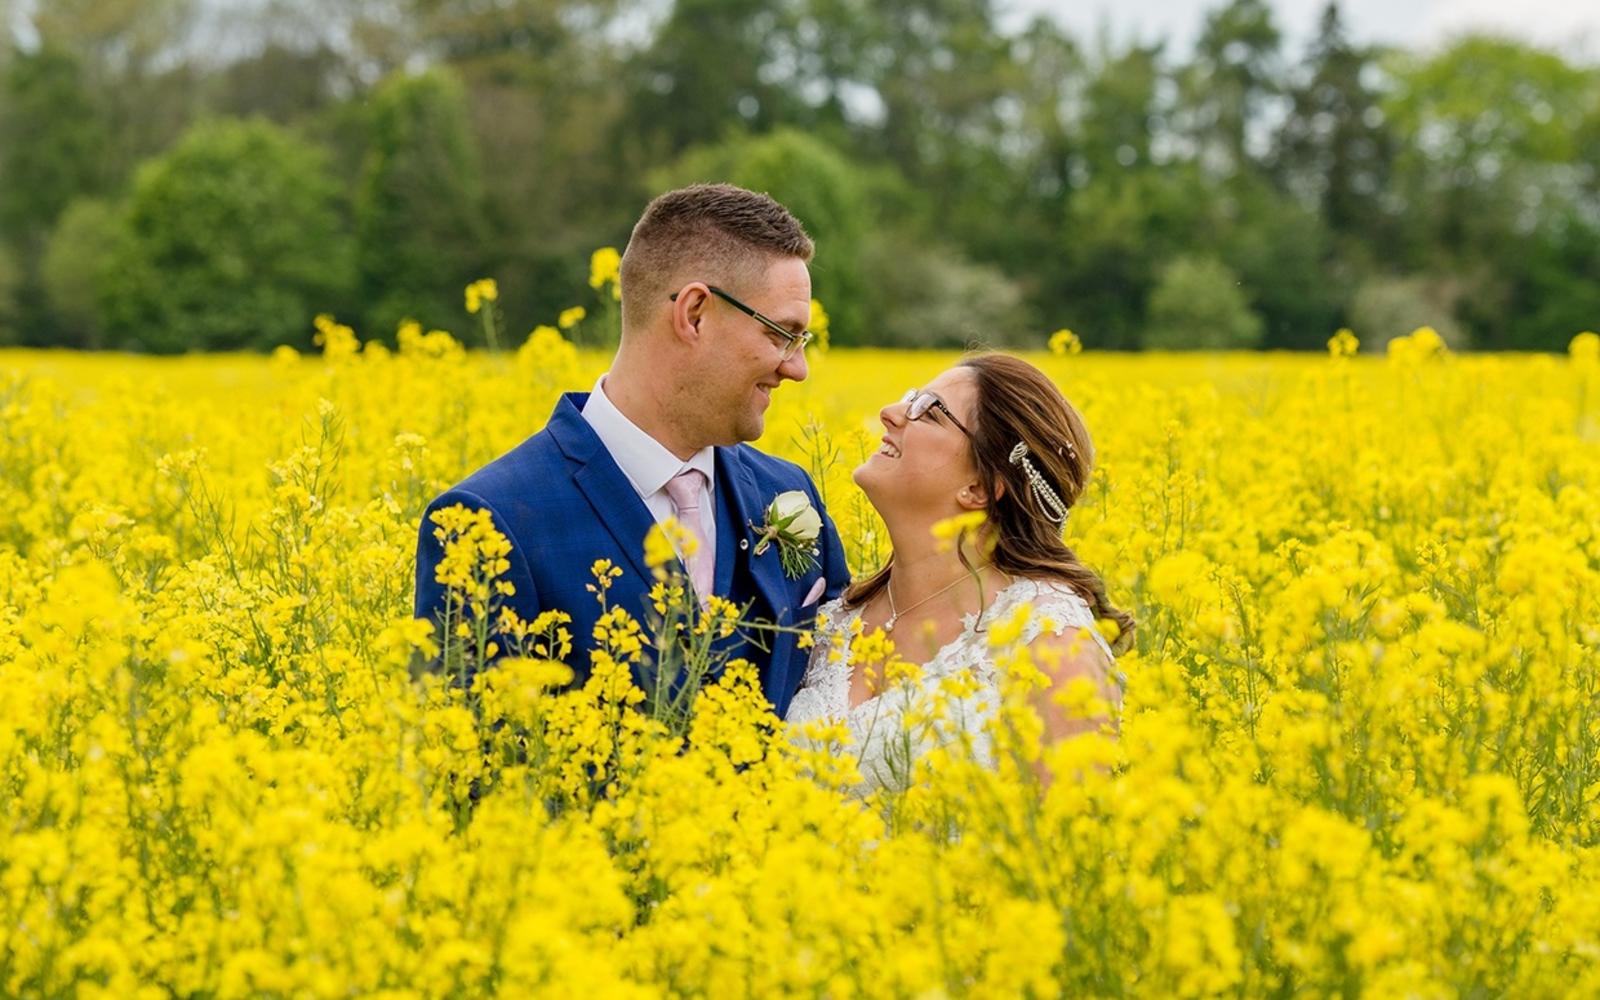 Capture Every Moment wedding photography duo from Cirencester reportage and traditional photographers Lapstone Barn Chipping Campden Cotswolds venue farmers field floral photo 